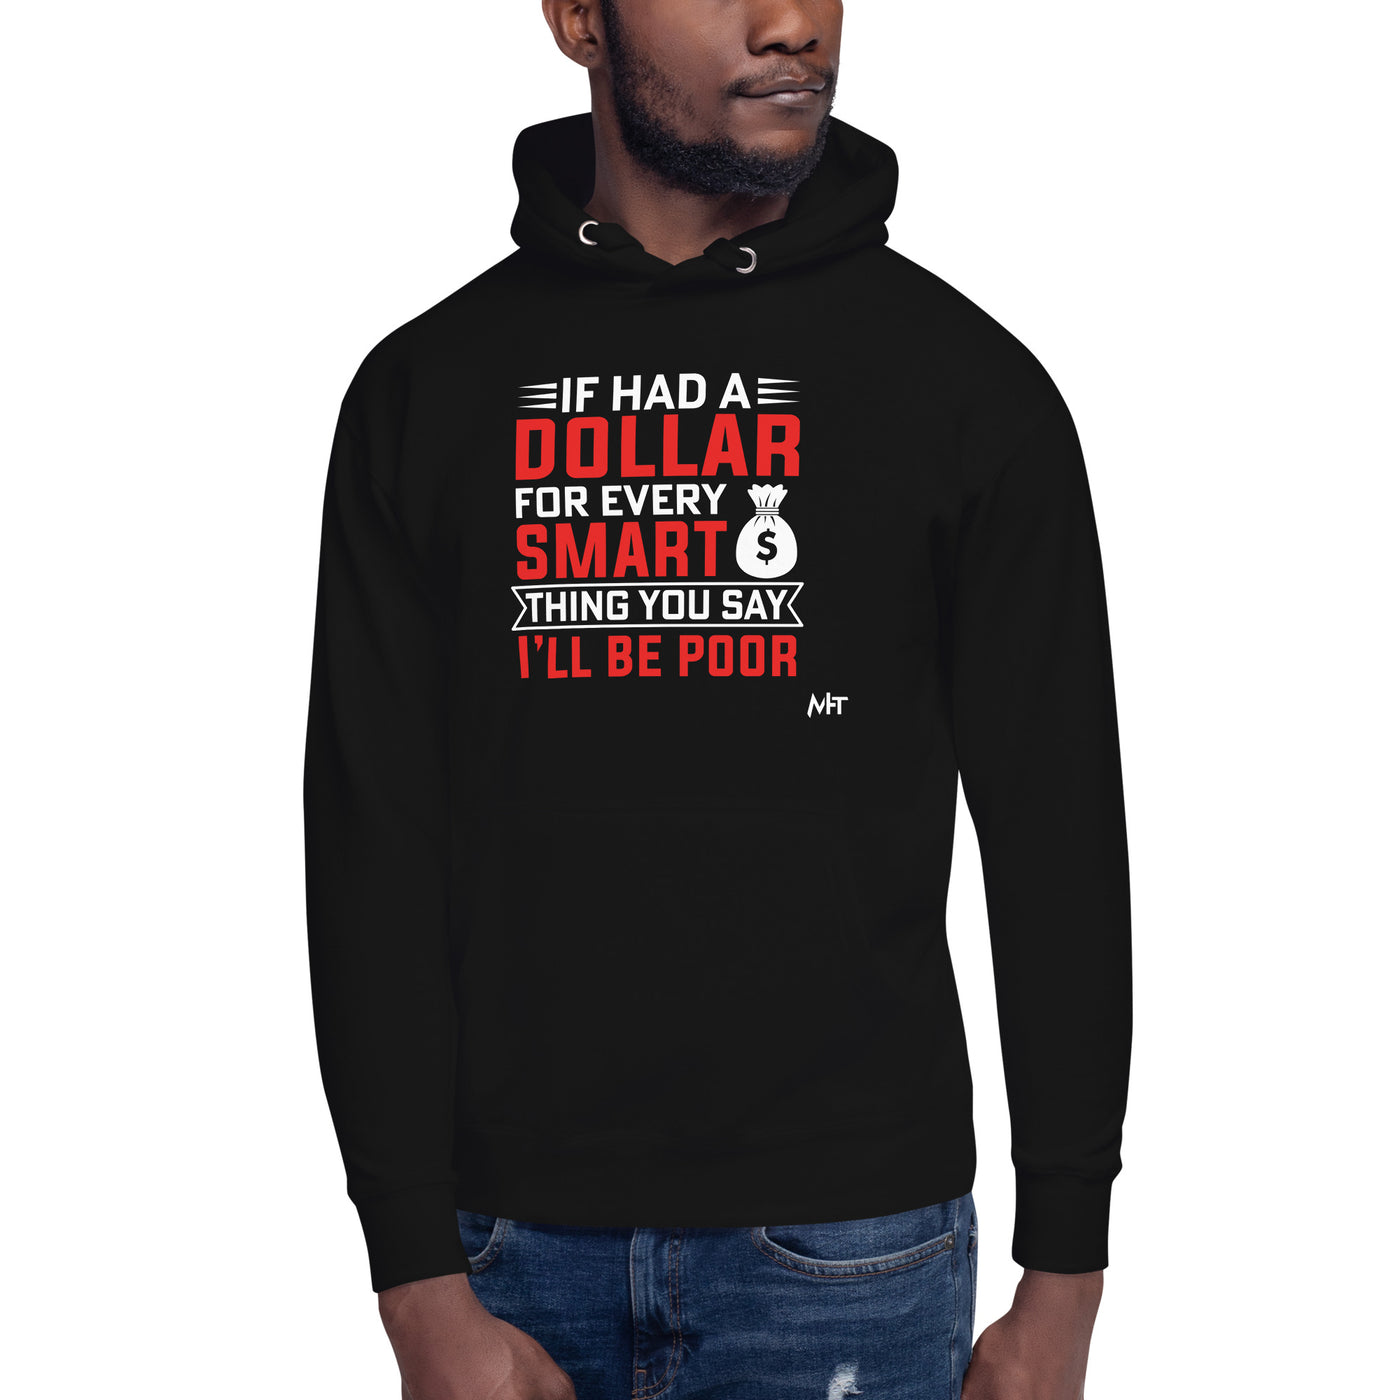 If I had a dollar for every smart thing you say, I'll be poor - Unisex Hoodie